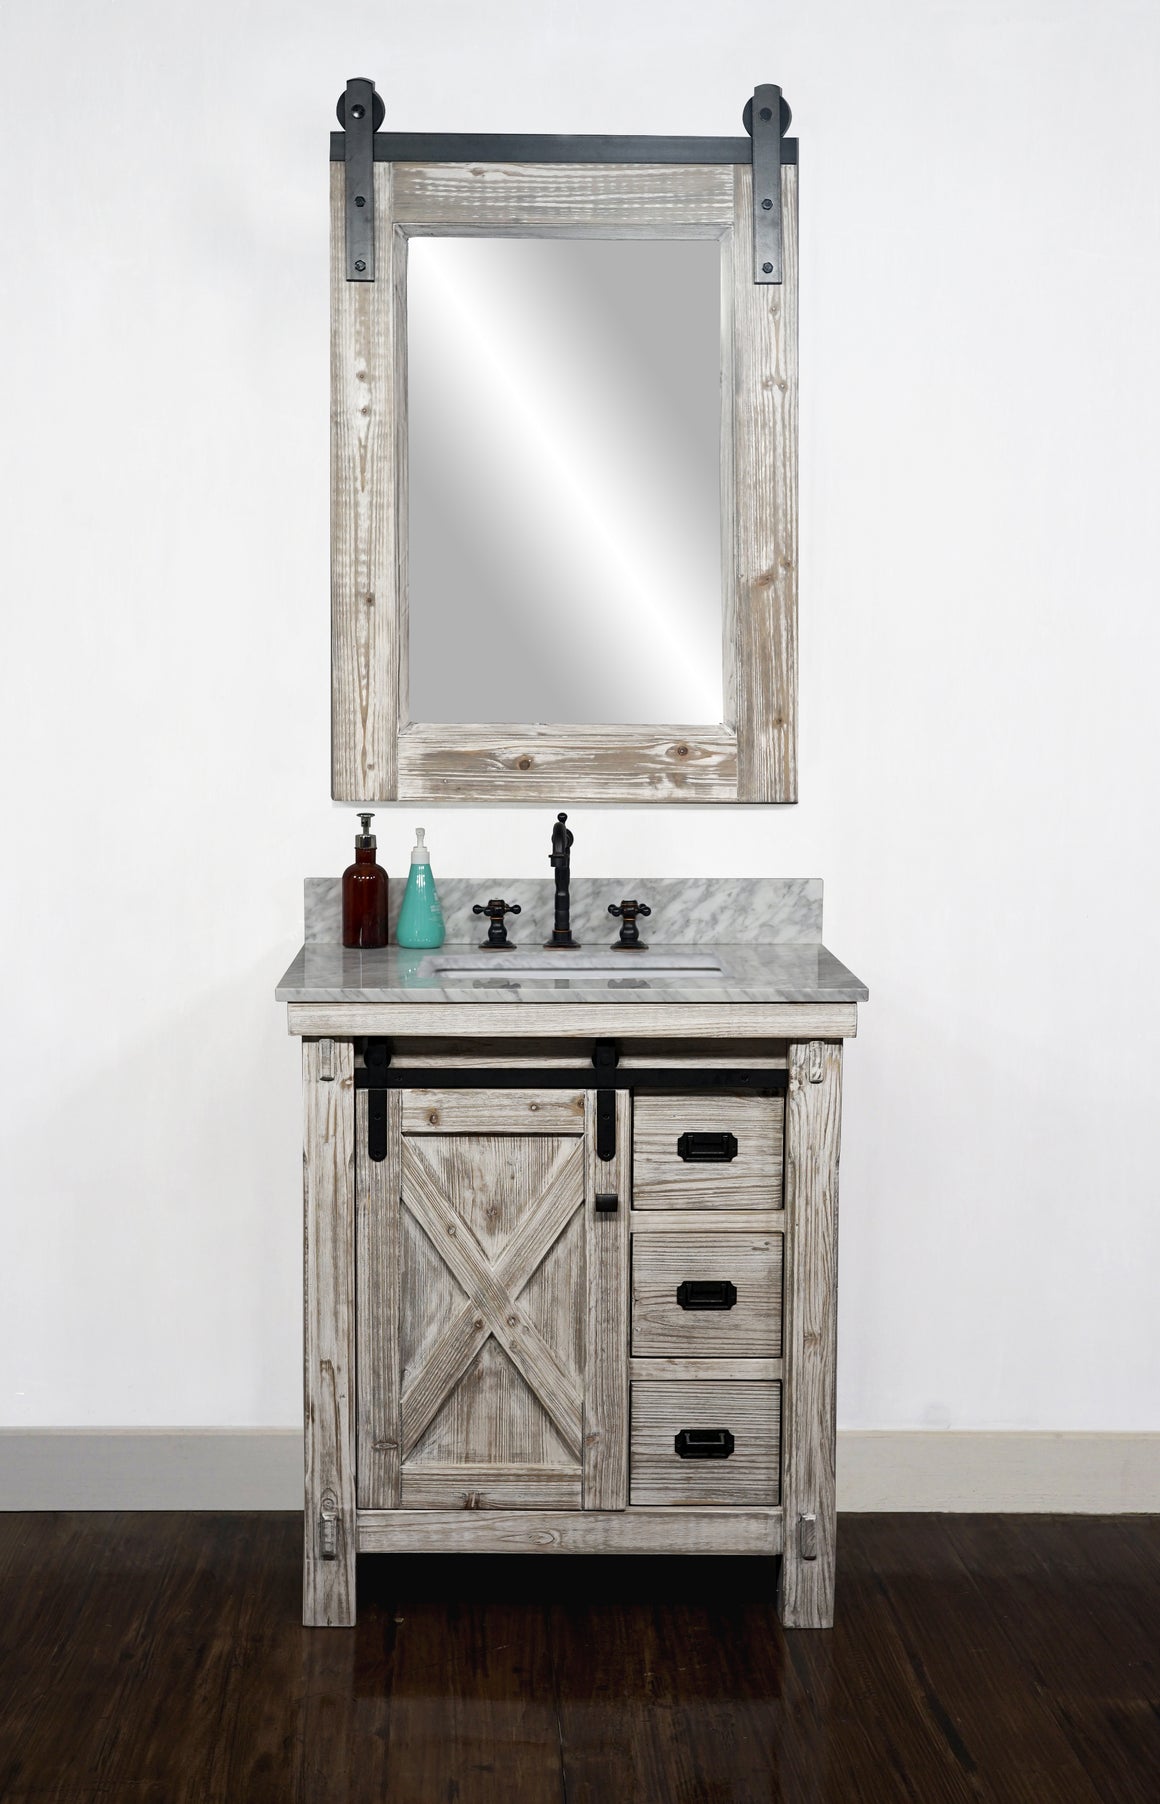 30"RUSTIC SOLID FIR BARN DOOR STYLE SINGLE SINK VANITY IN WHITE WASH WITH CARRARA WHITE MARBLE TOP WITH RECTANGULAR SINK-NO FAUCET